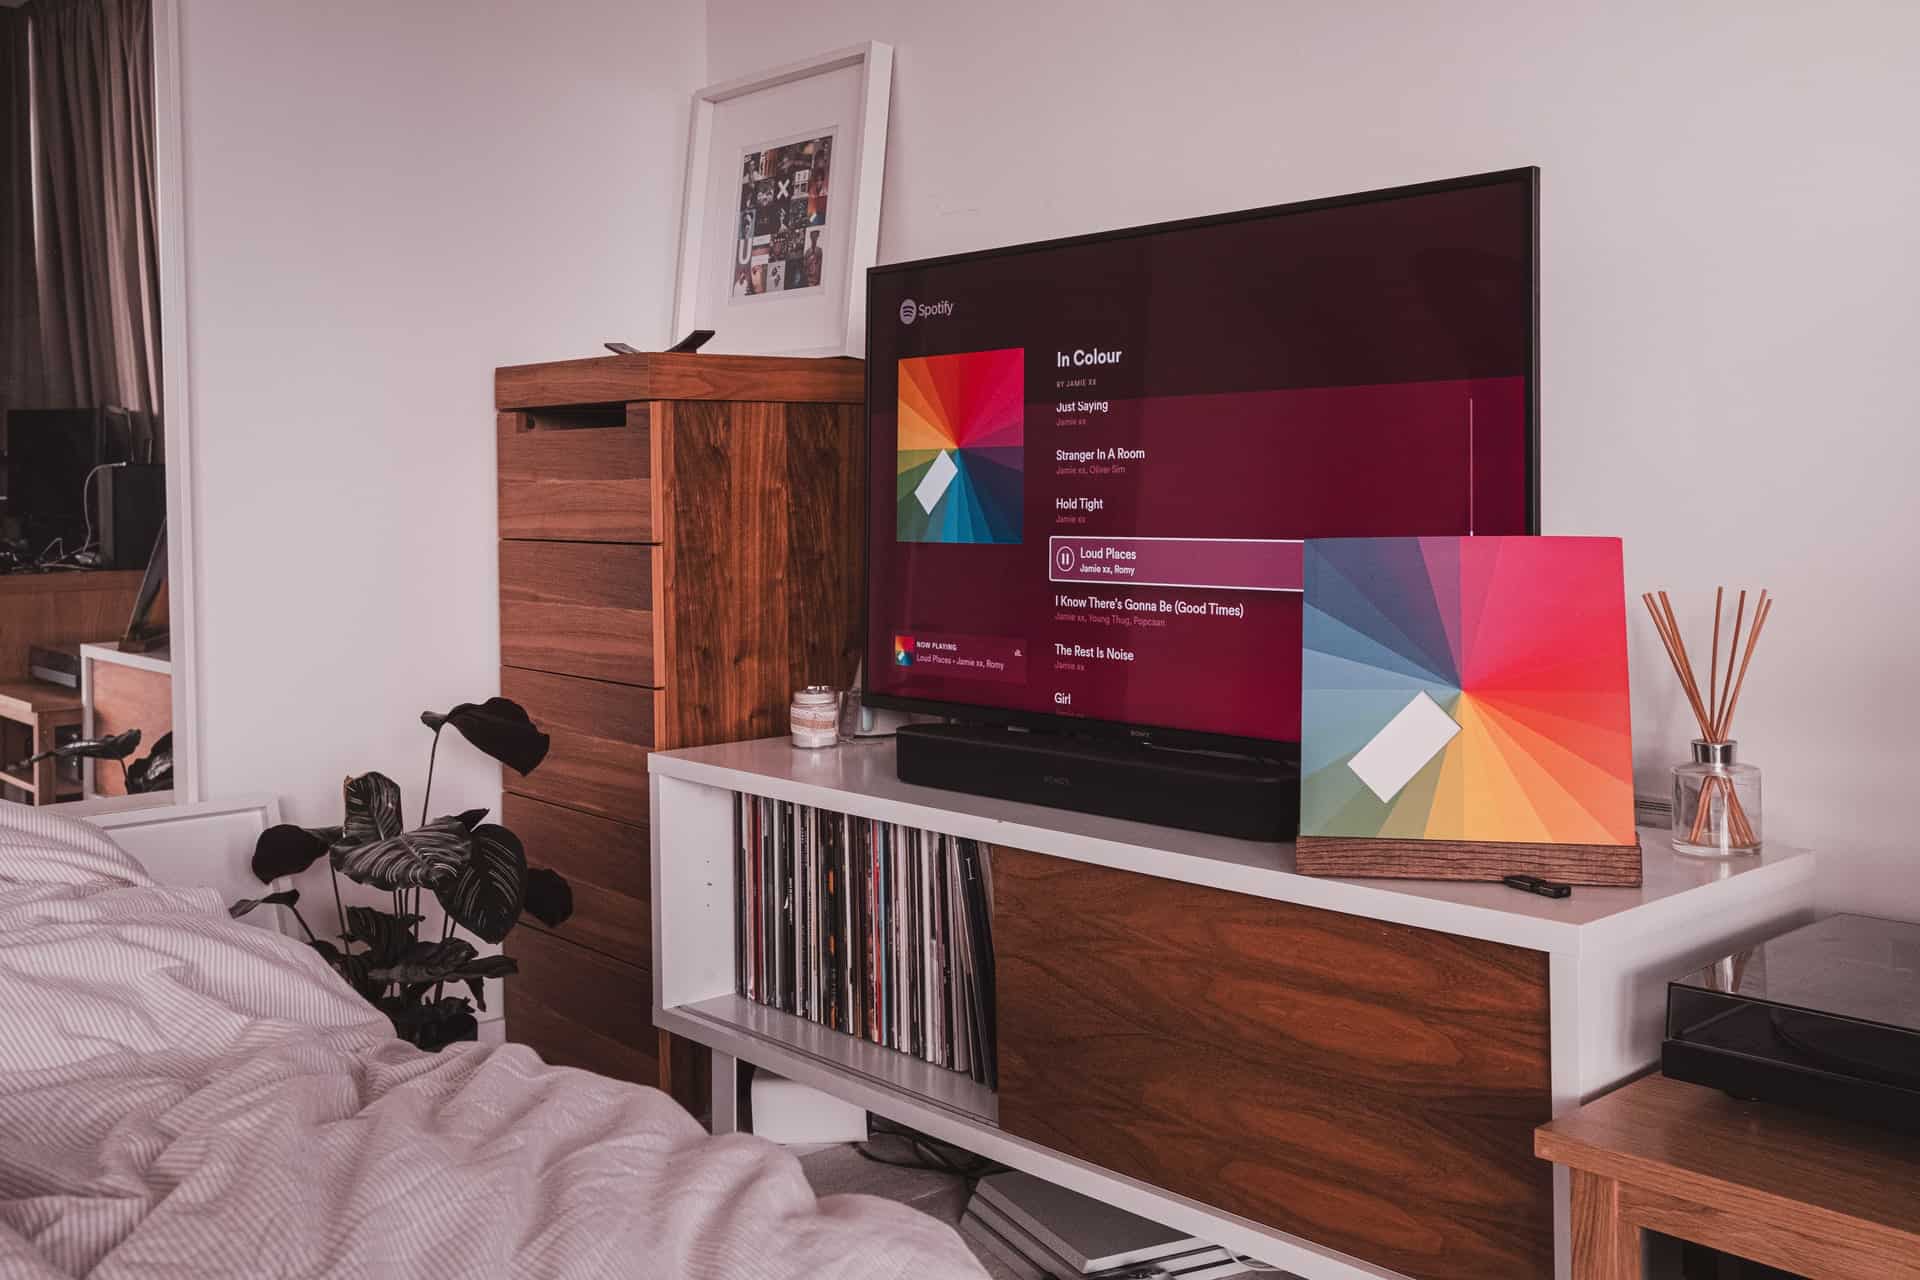 How to set up a TV in the bedroom?